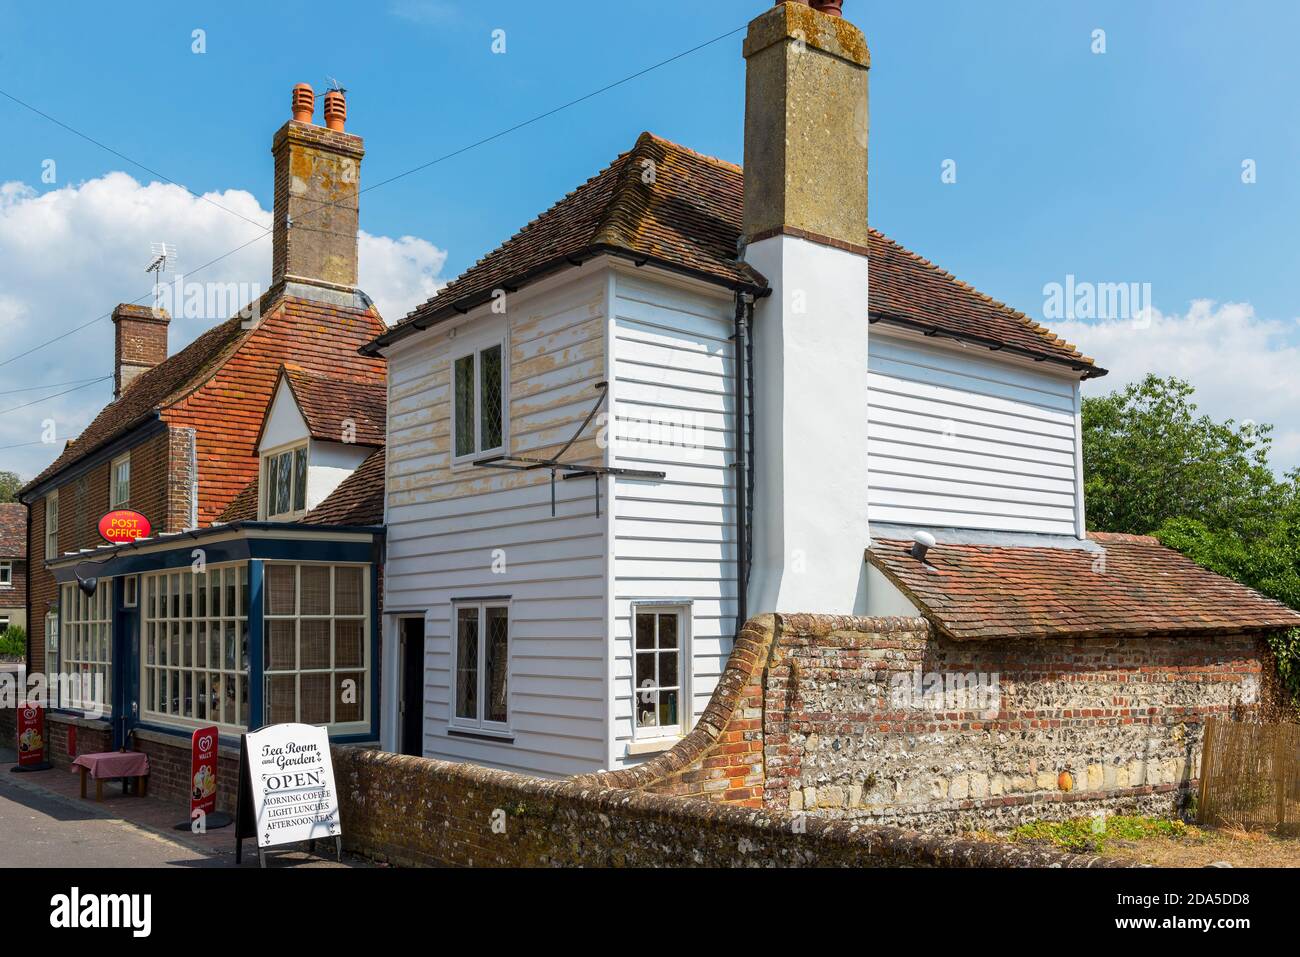 The General Store and Post Office and the Tea Room in the village of Glynde, East Sussex, England Stock Photo